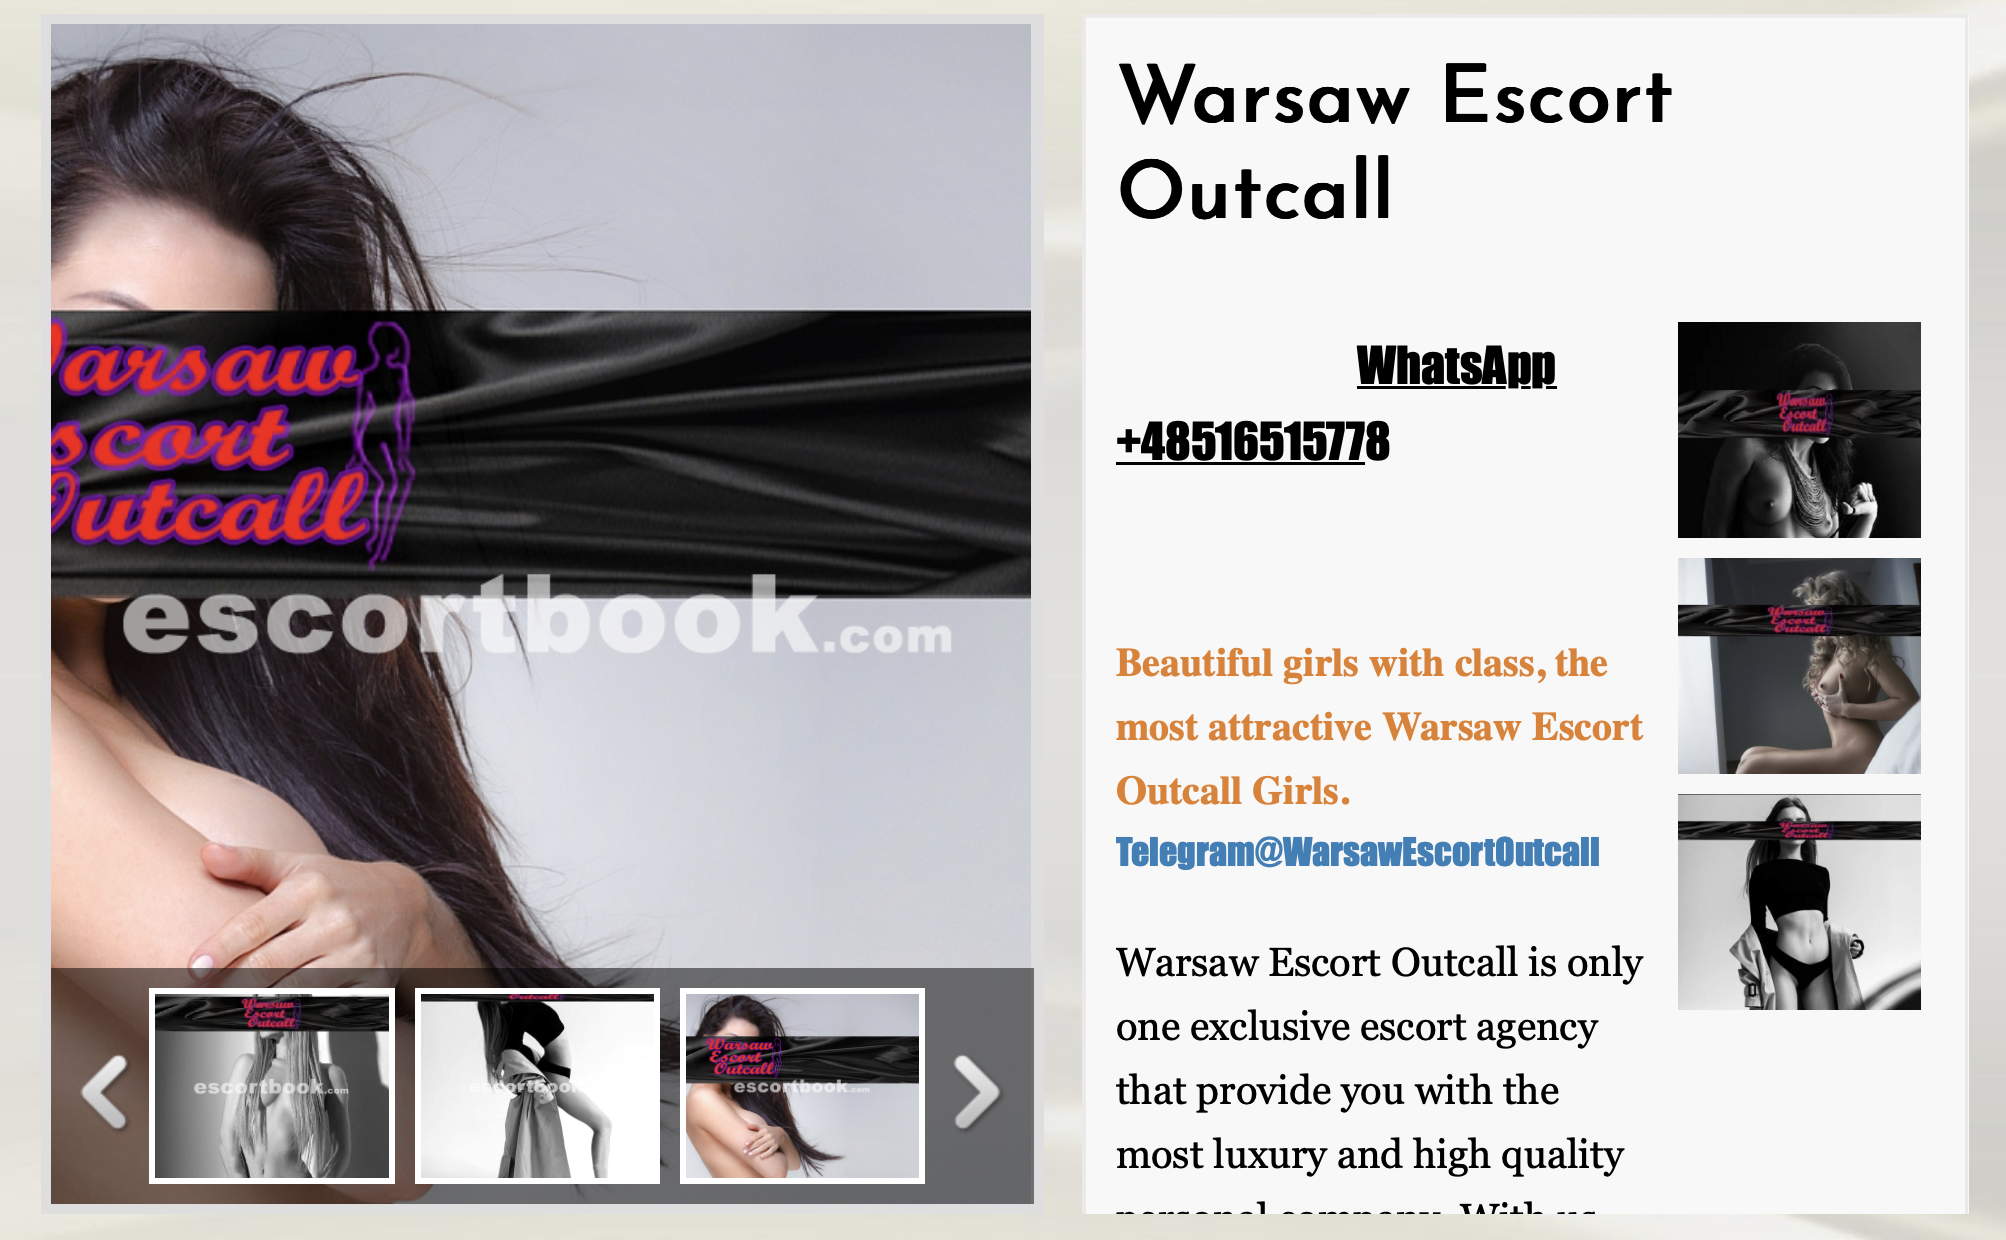 Agency Warsaw Escort Outcall